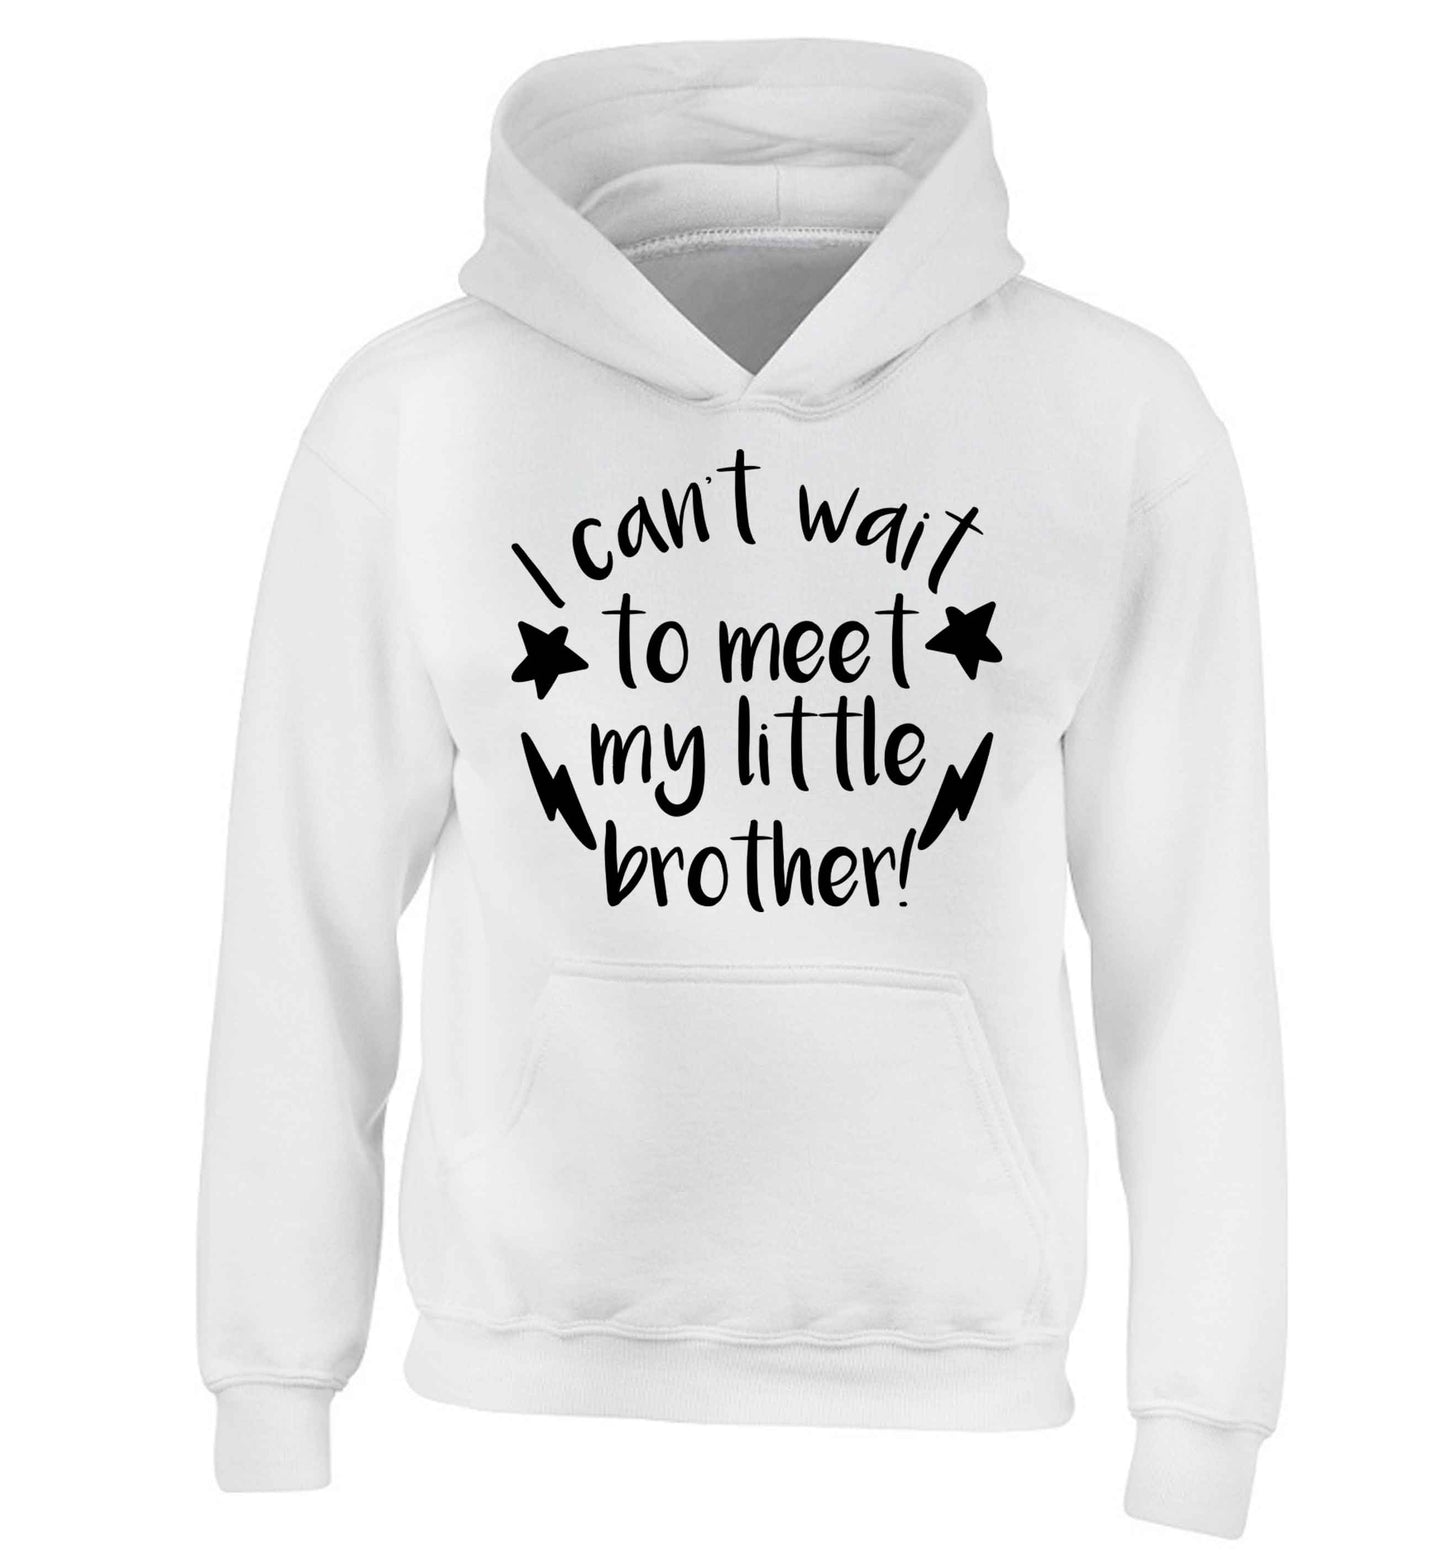 I can't wait to meet my sister! children's white hoodie 12-13 Years